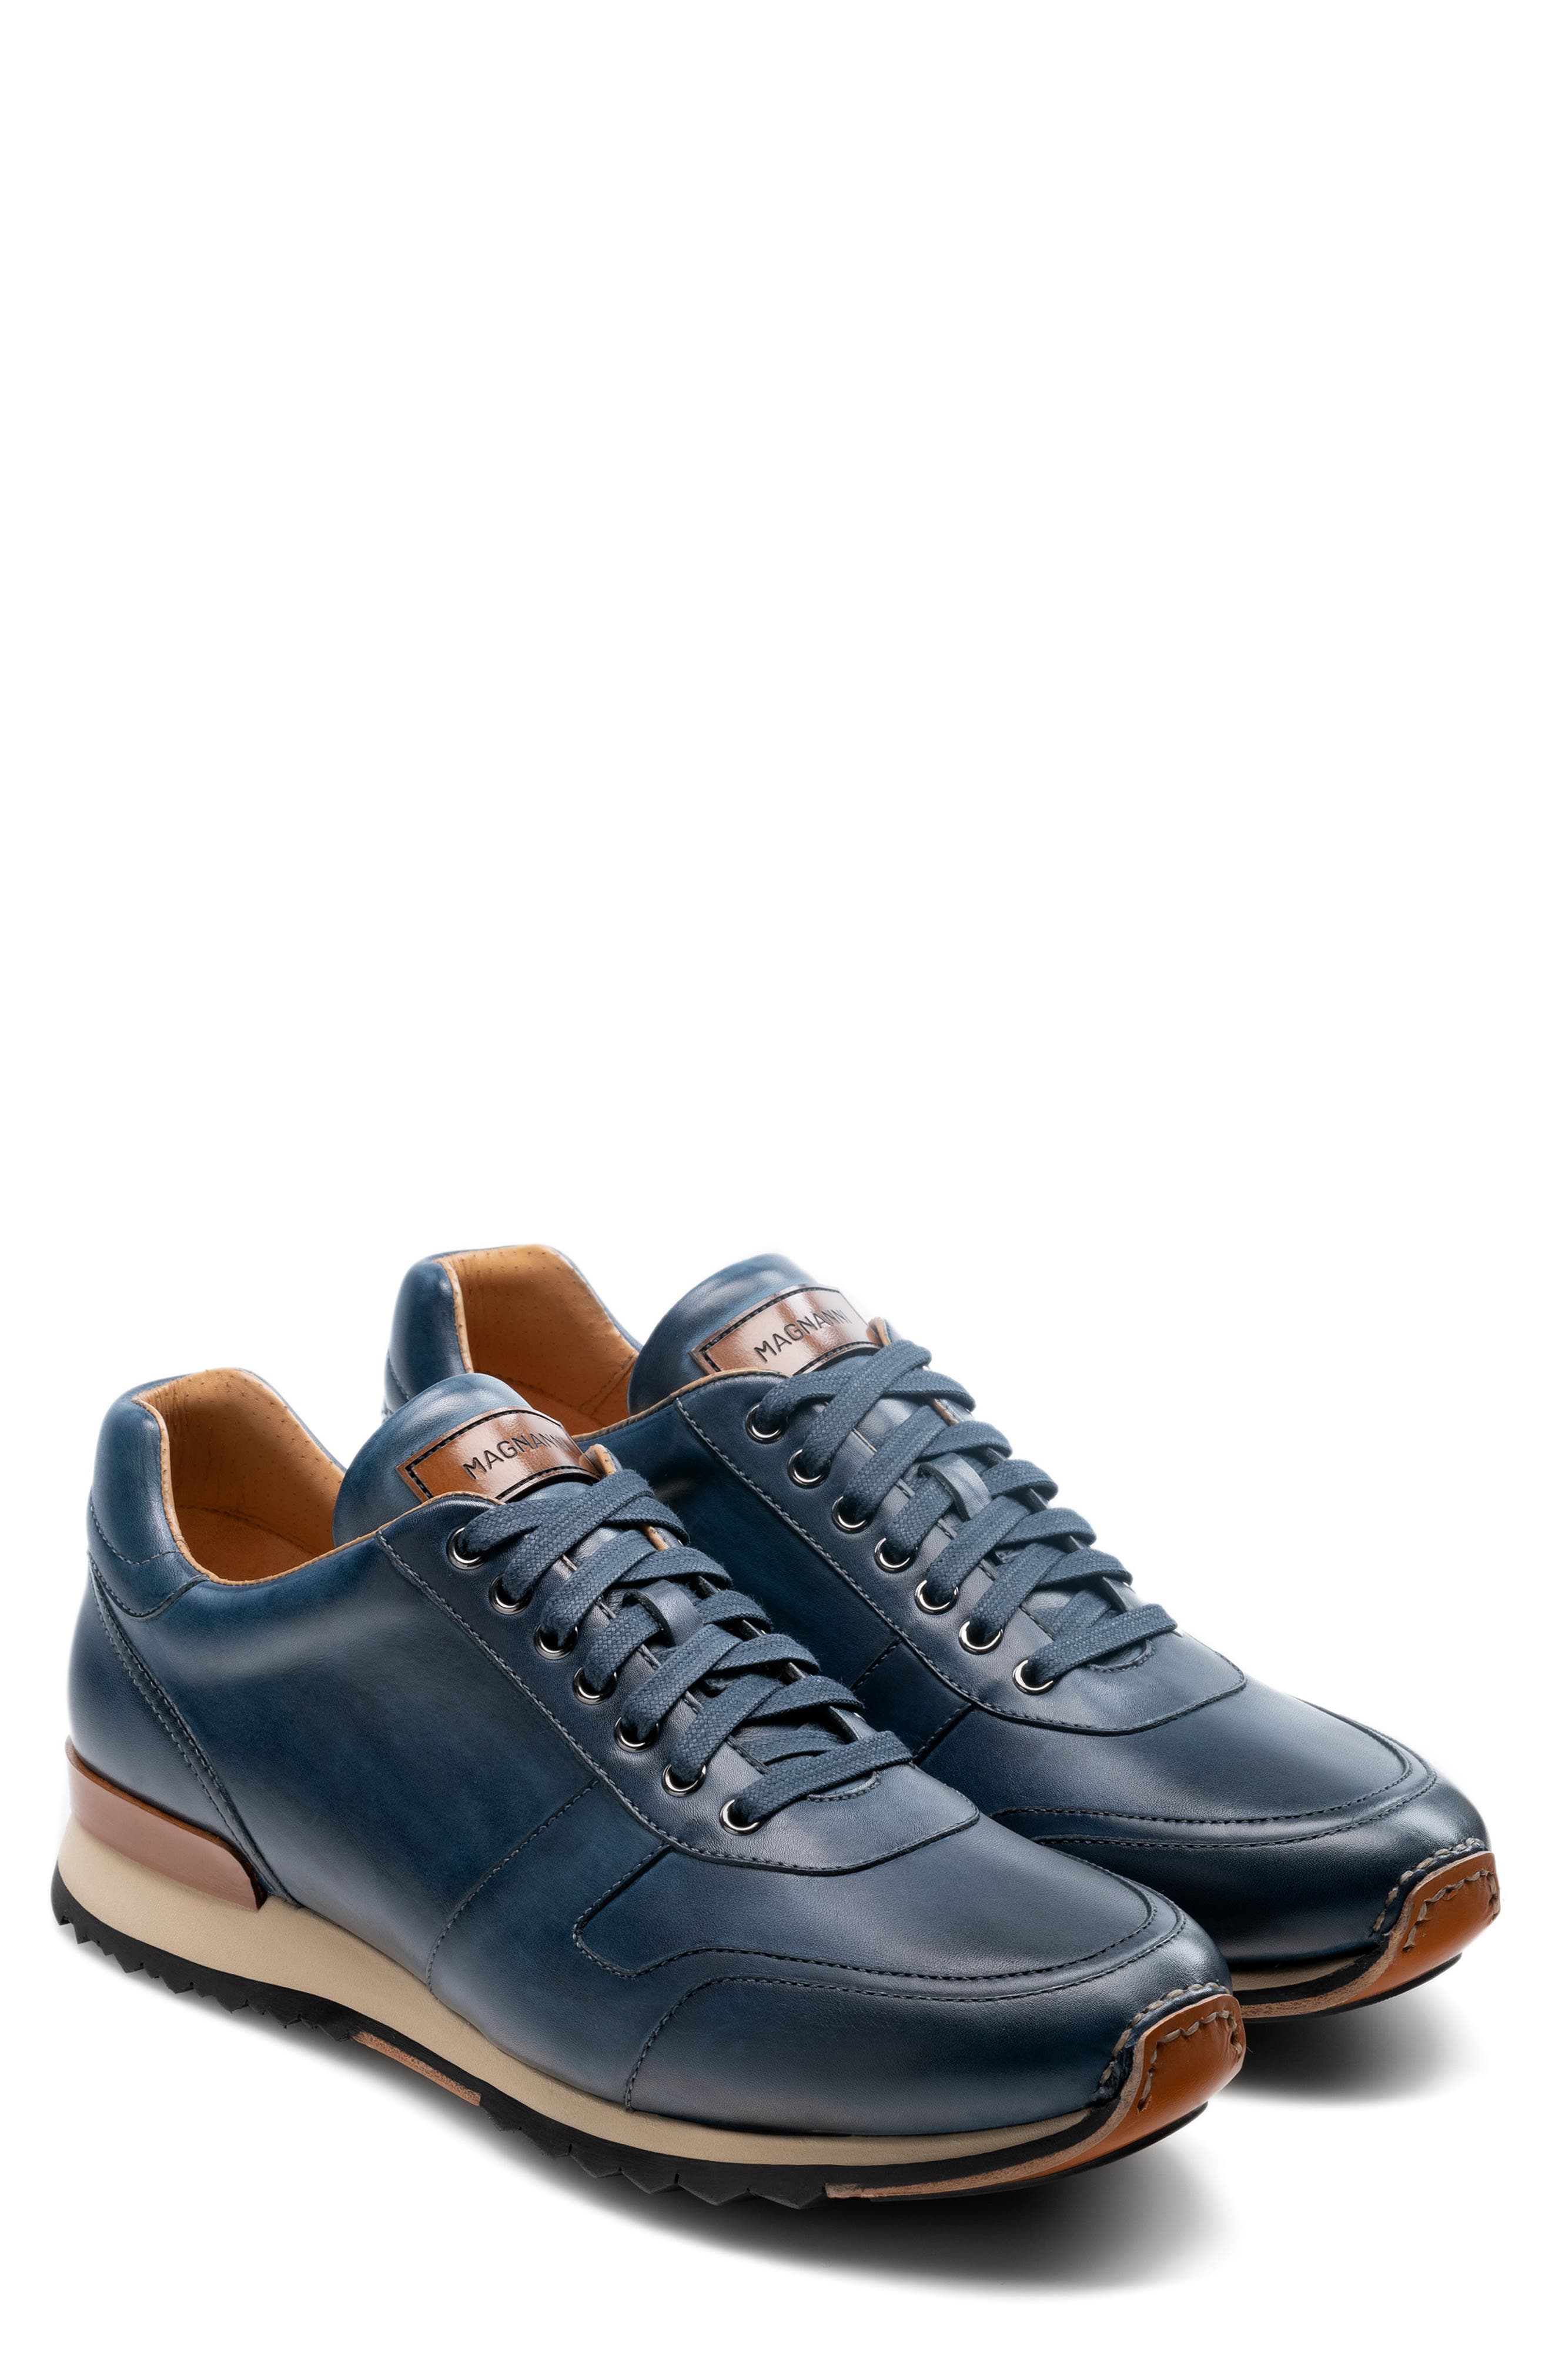 magnanni sneakers blue